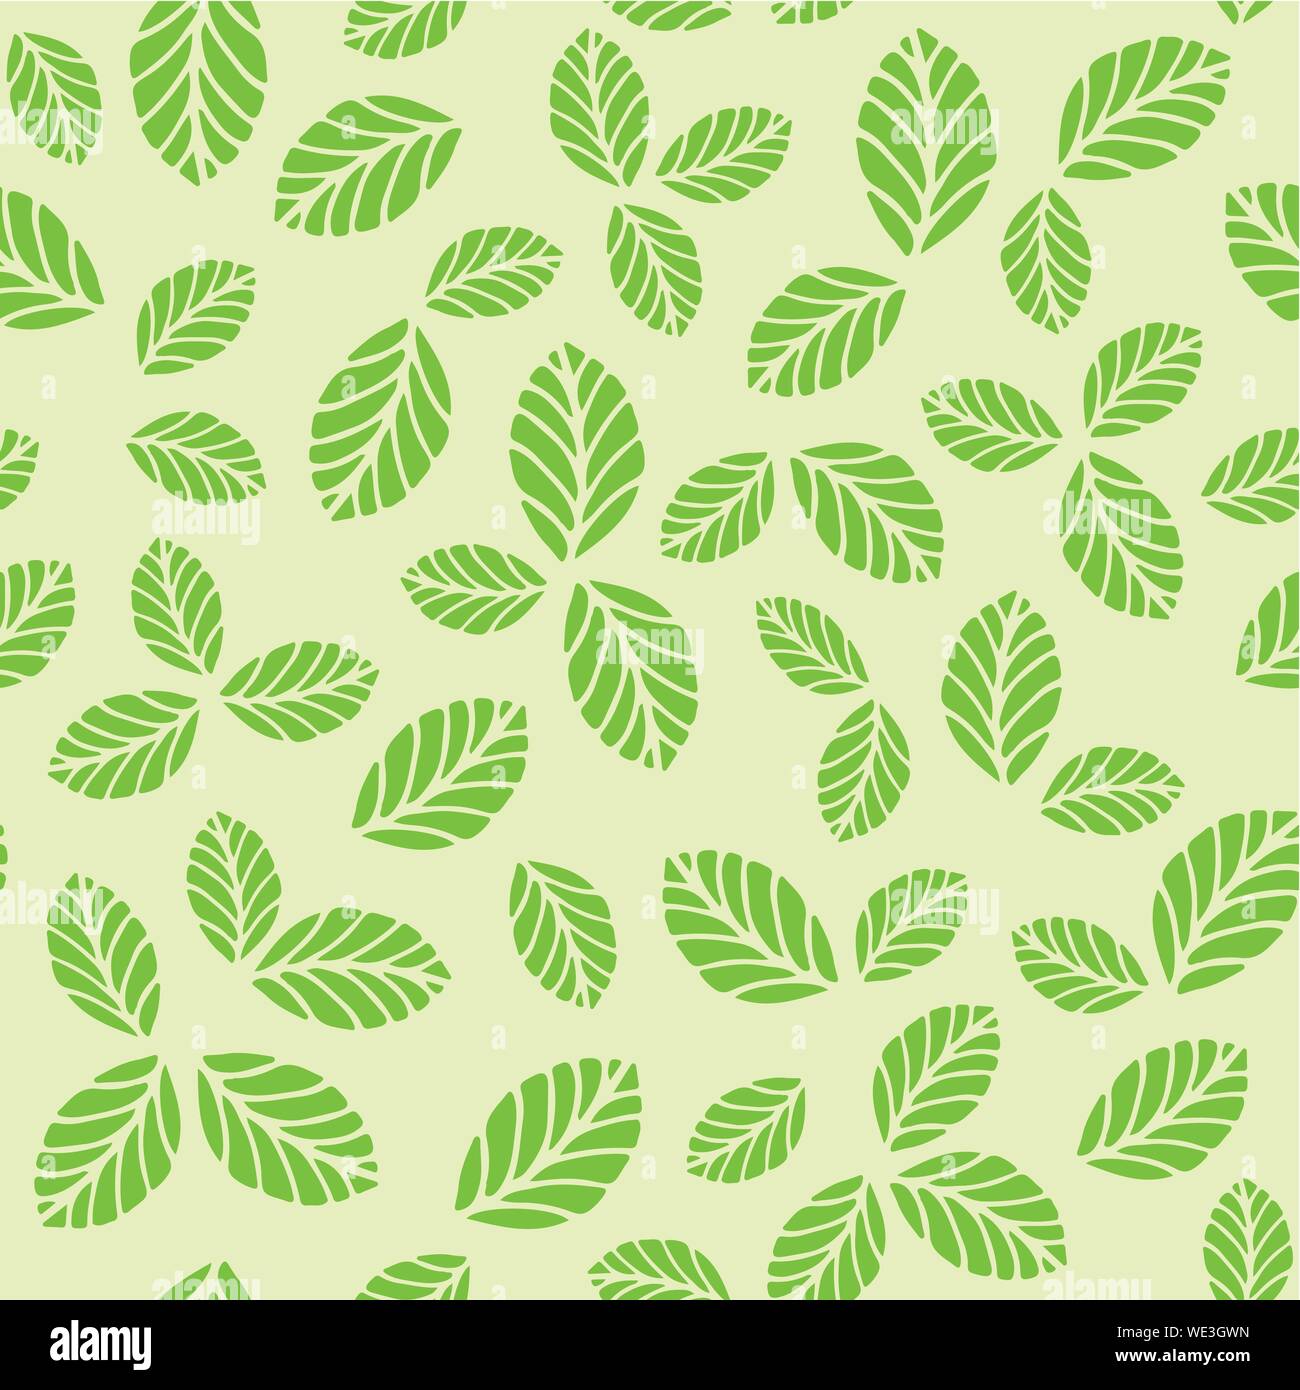 Seamless vector pattern with green strawberry leaves. For fabric print, wallpaper design Stock Vector